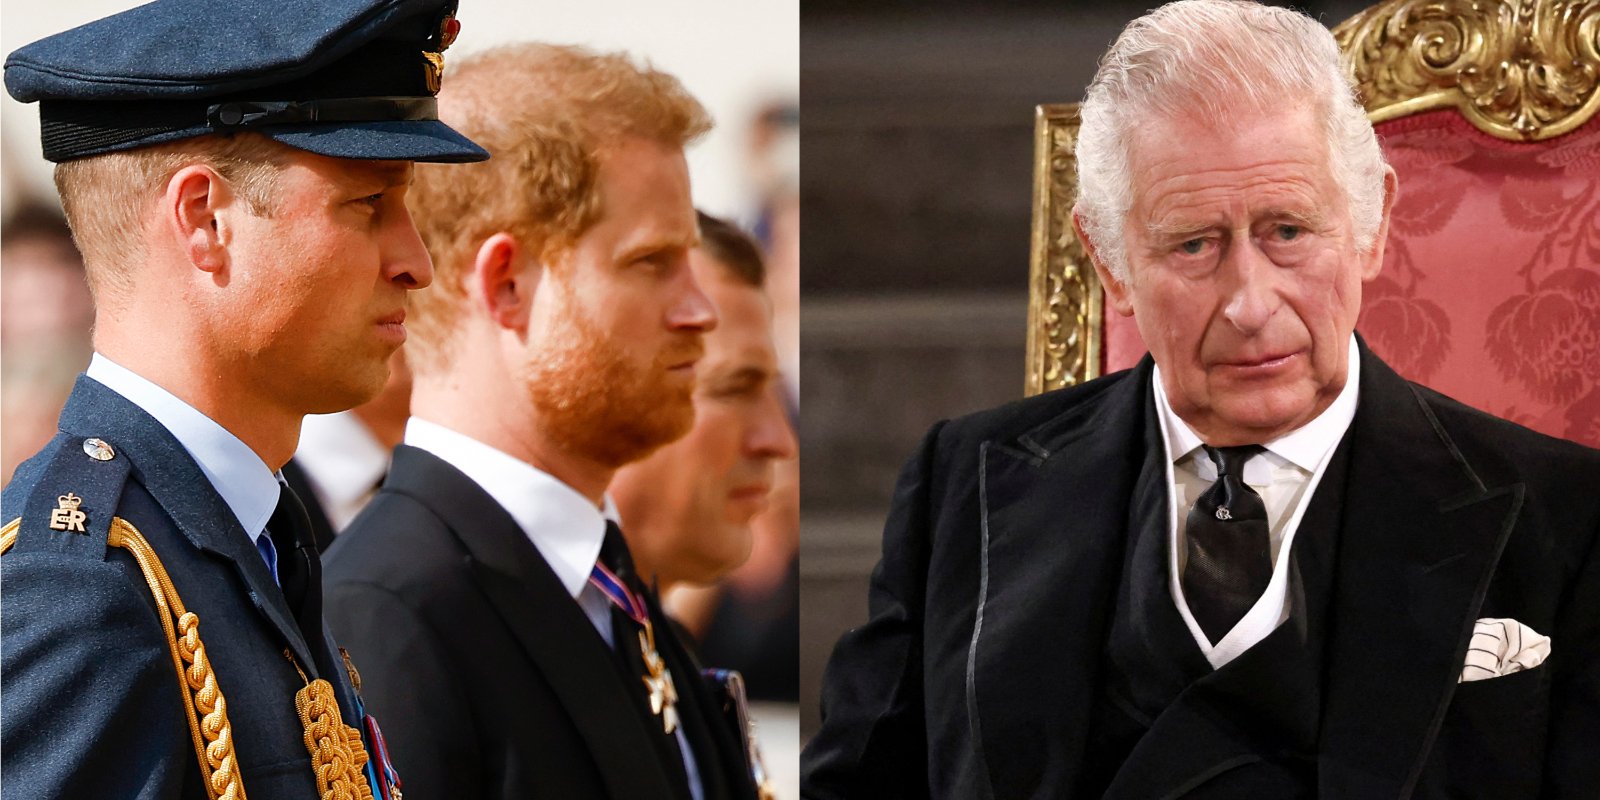 Prince William, Prince Harry and King Charles III in side by side photographs.